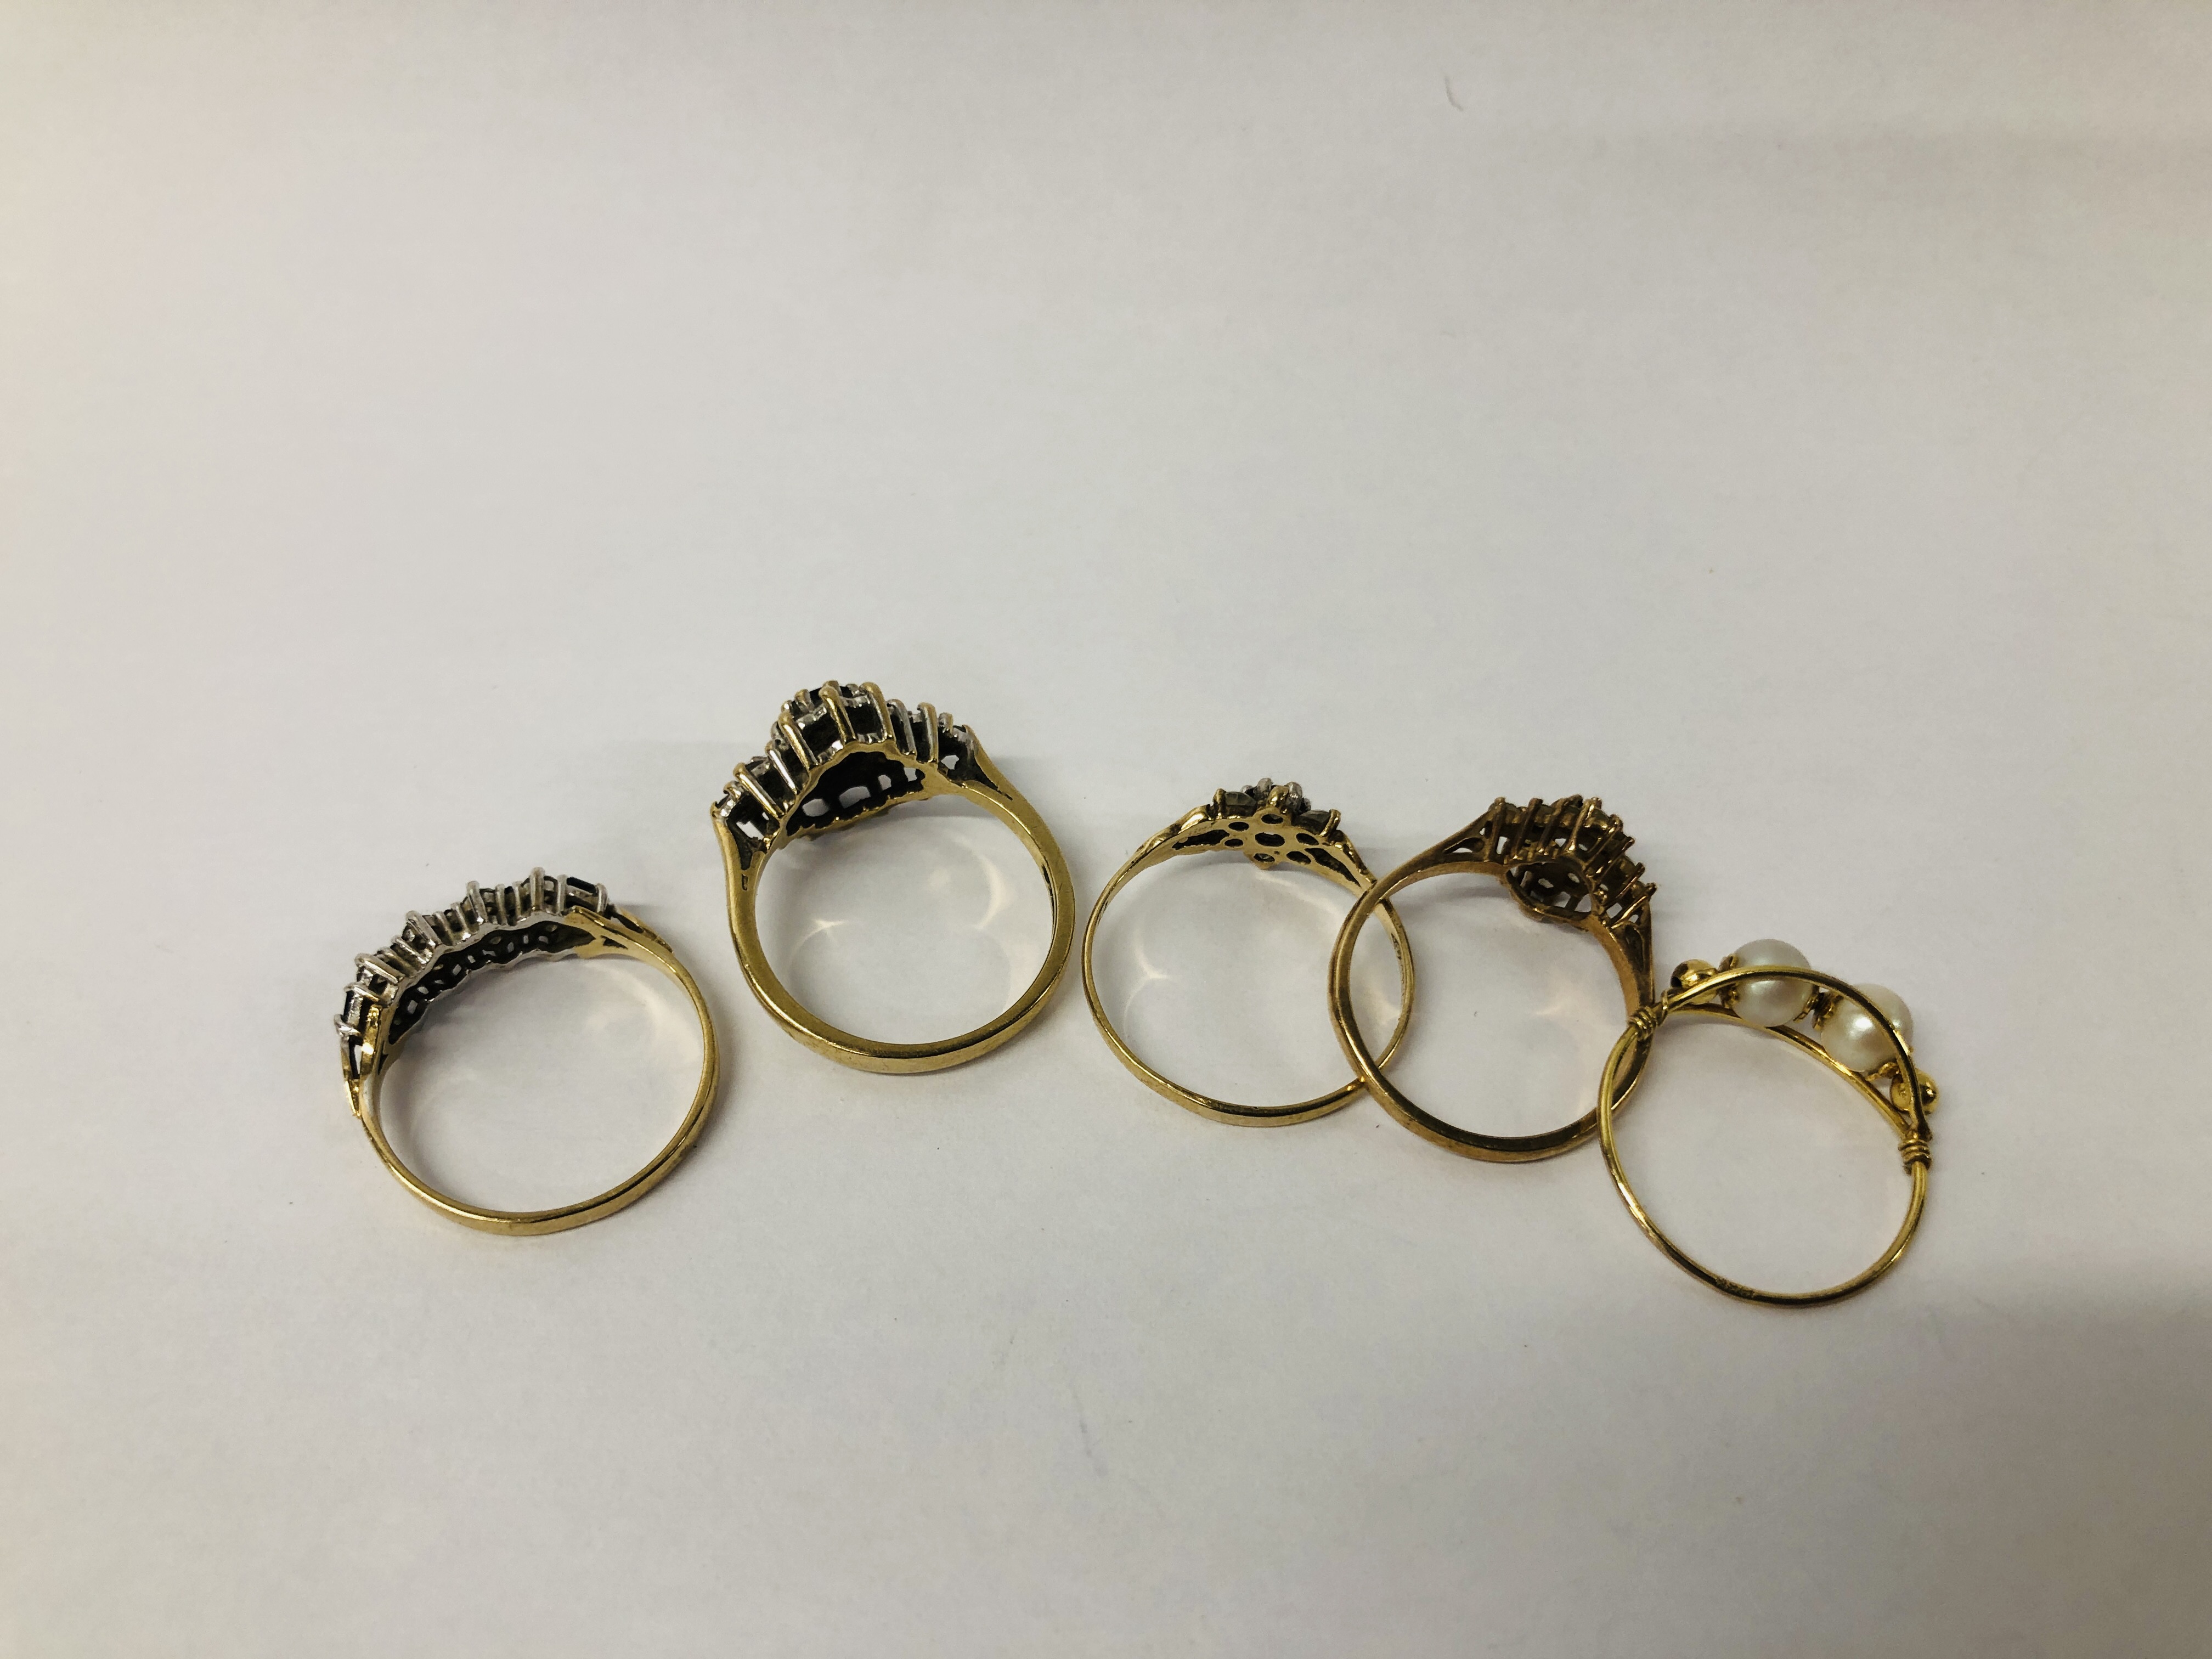 FOUR VARIOUS 9CT. GOLD STONE SET DRESS RINGS AND ONE PEARL SET RING MARKED 9KT. - Image 5 of 9